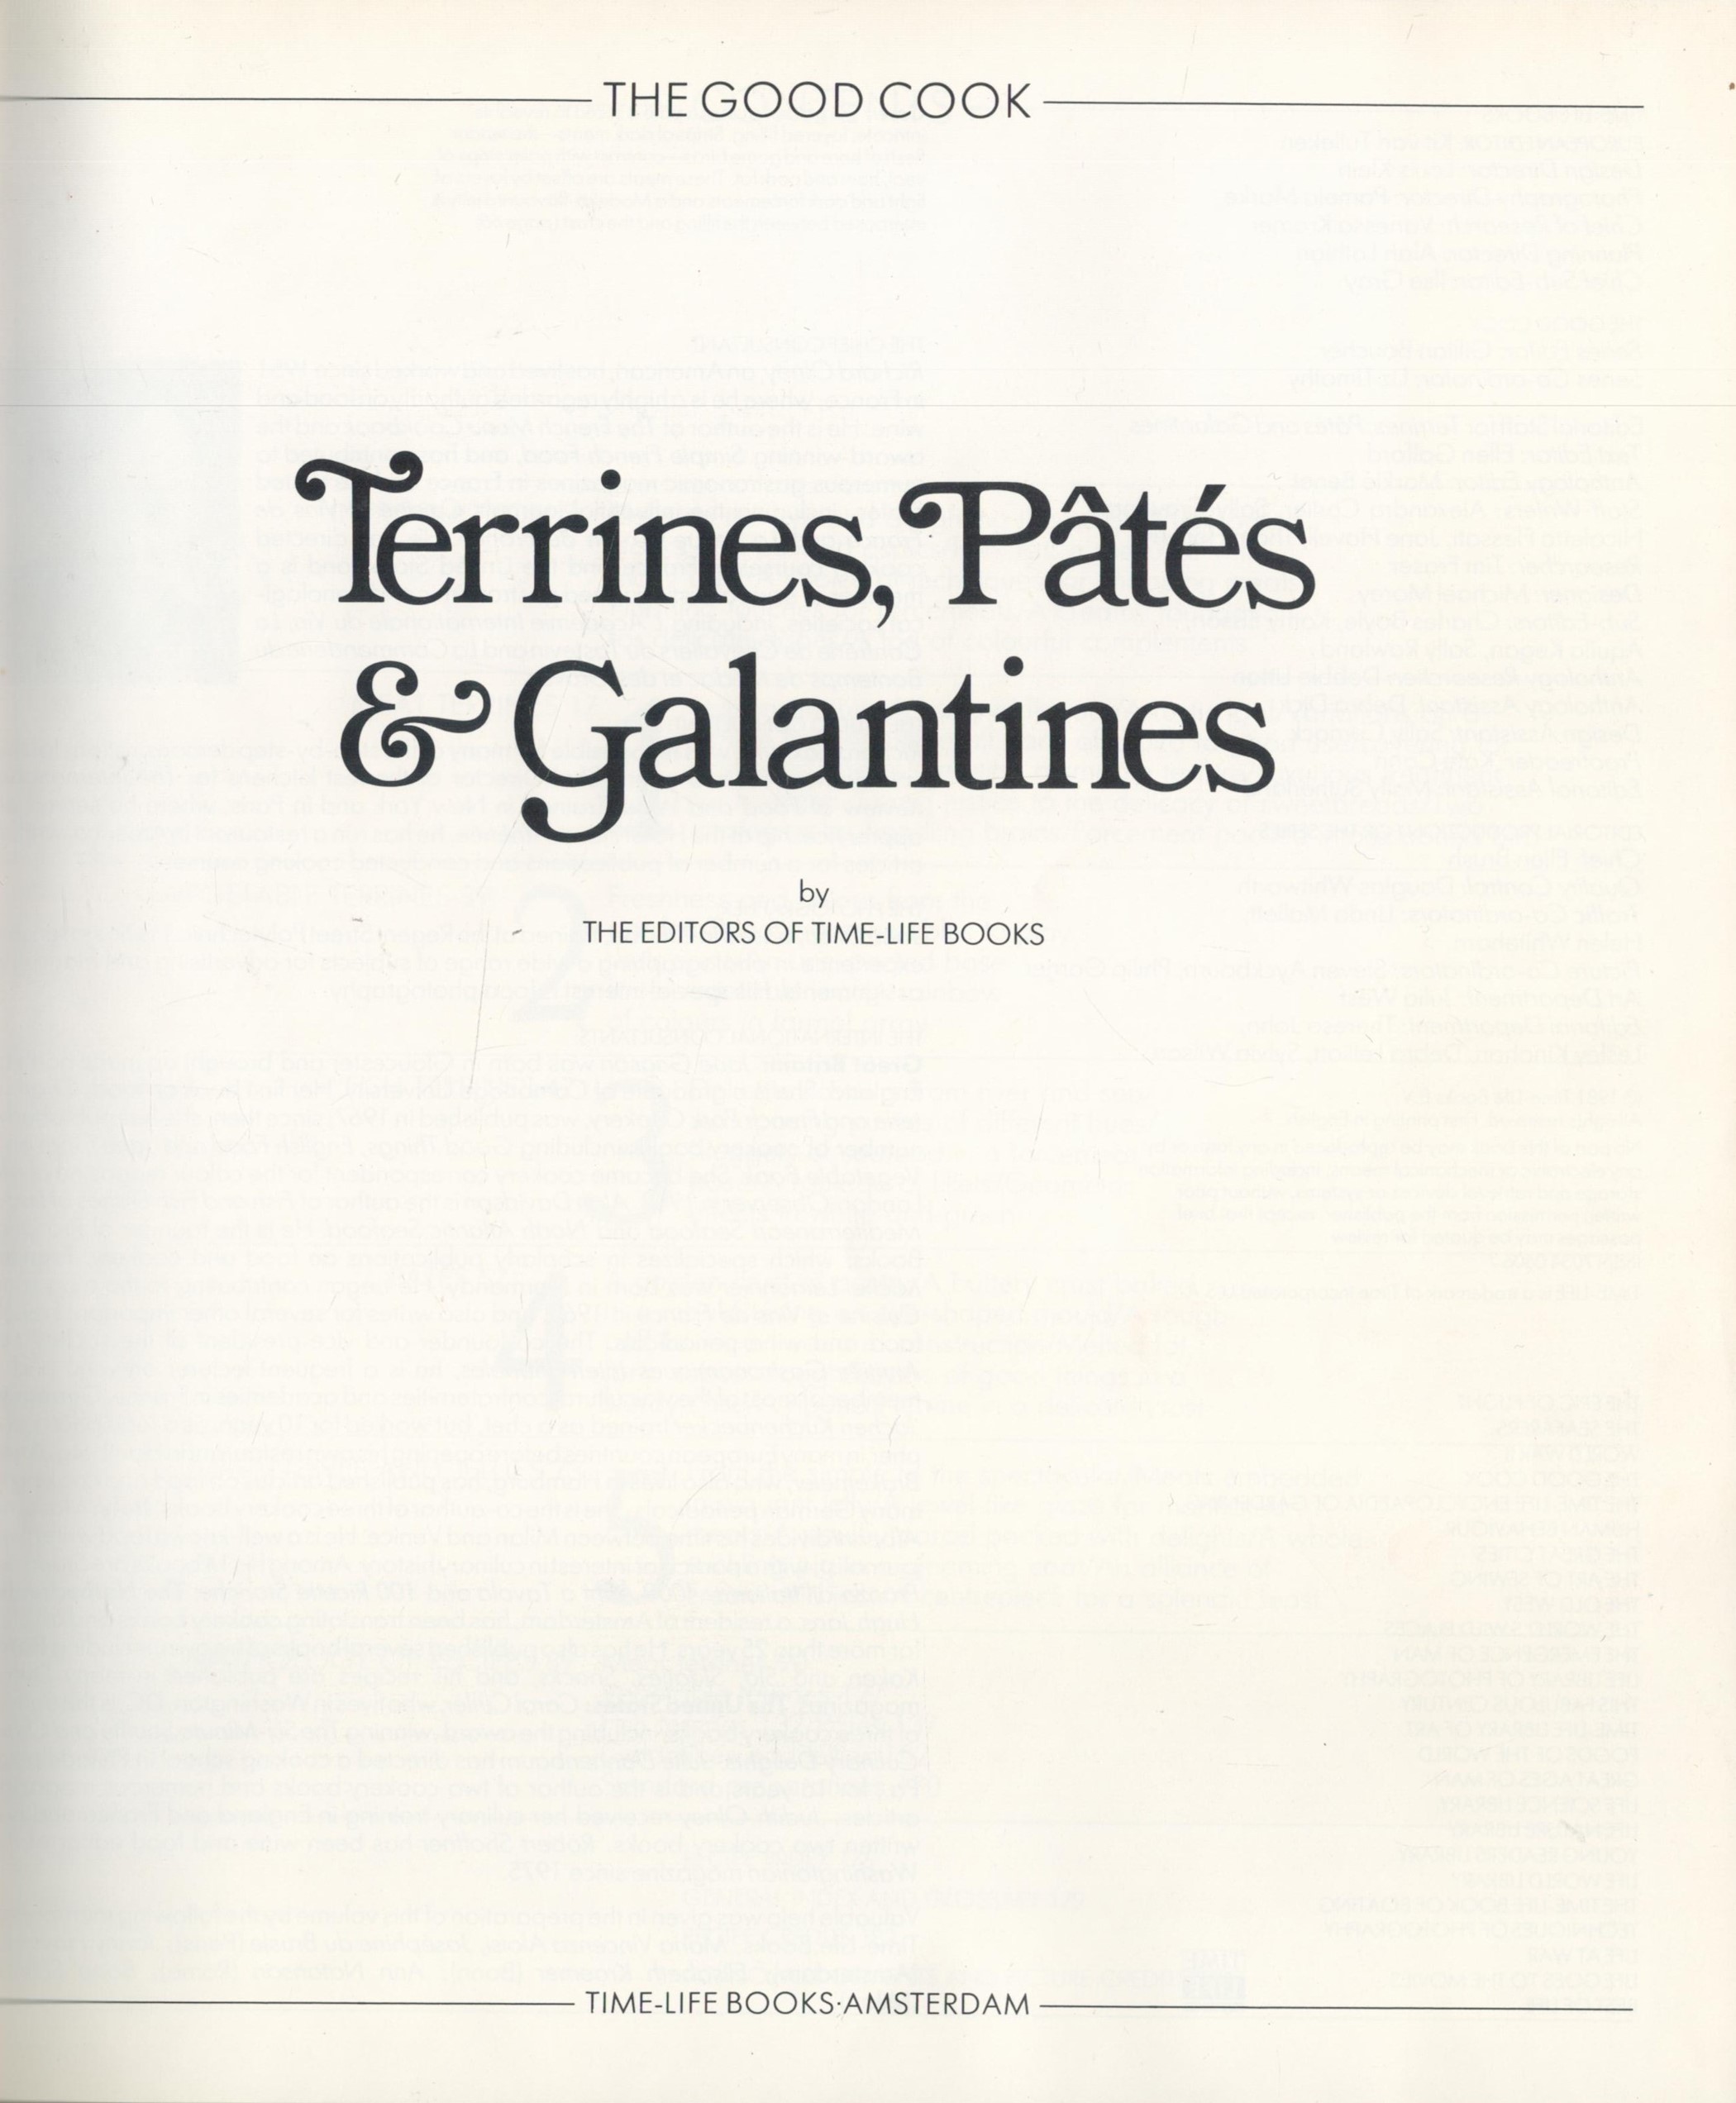 Terrines, Pates and Galantines by The Editors of Time-Life Books 1981 First Edition Hardback Book - Image 2 of 3